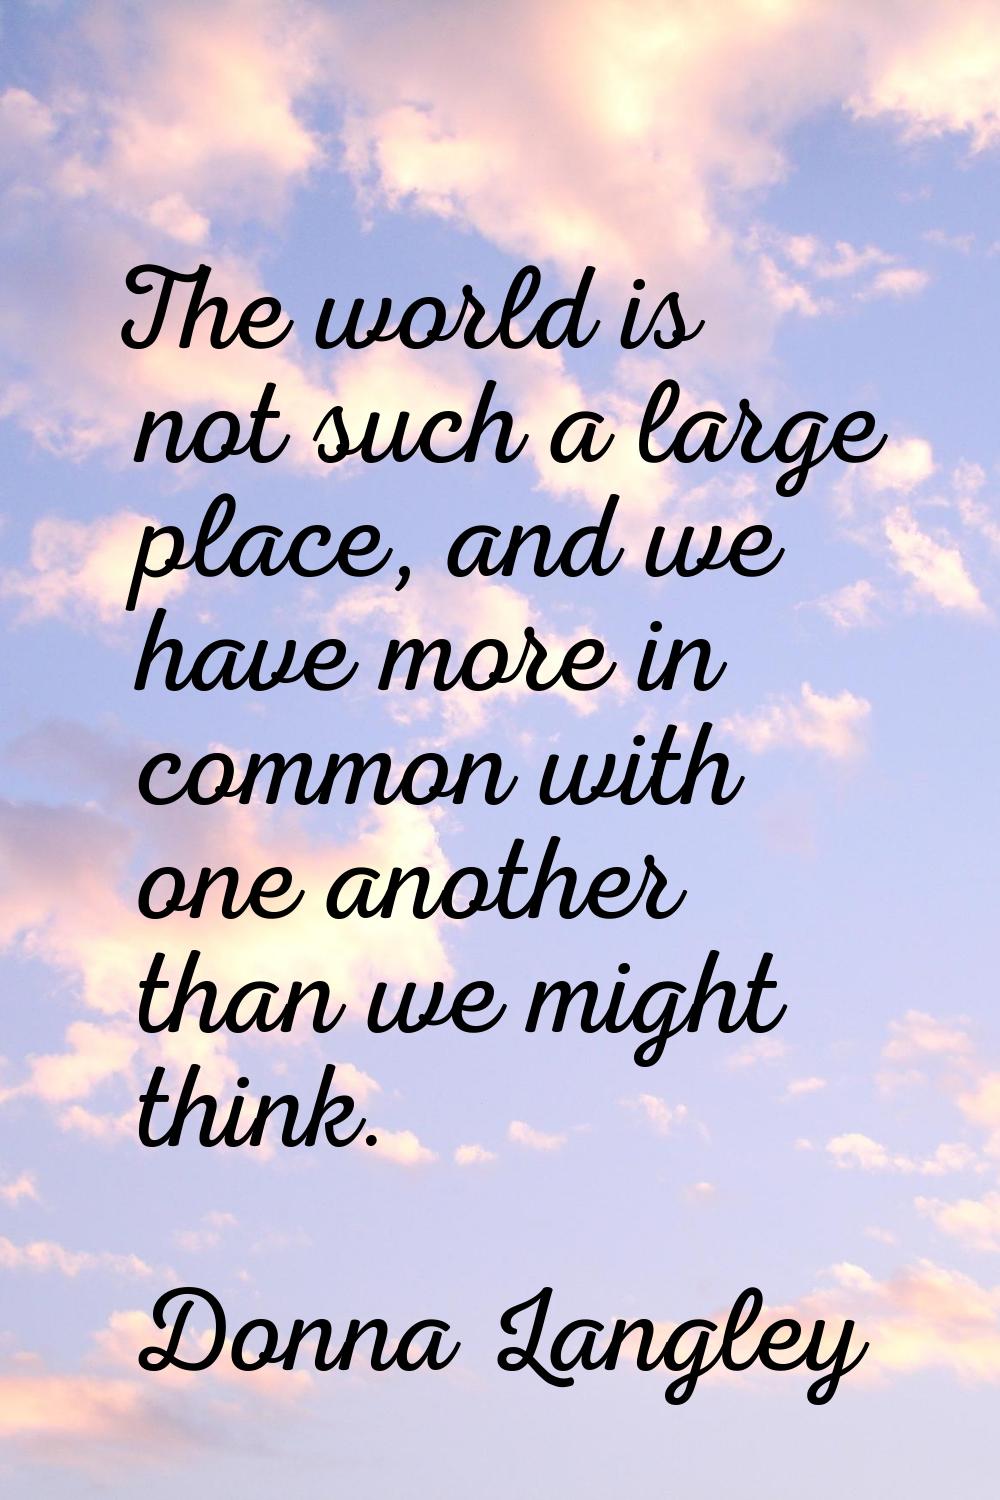 The world is not such a large place, and we have more in common with one another than we might thin